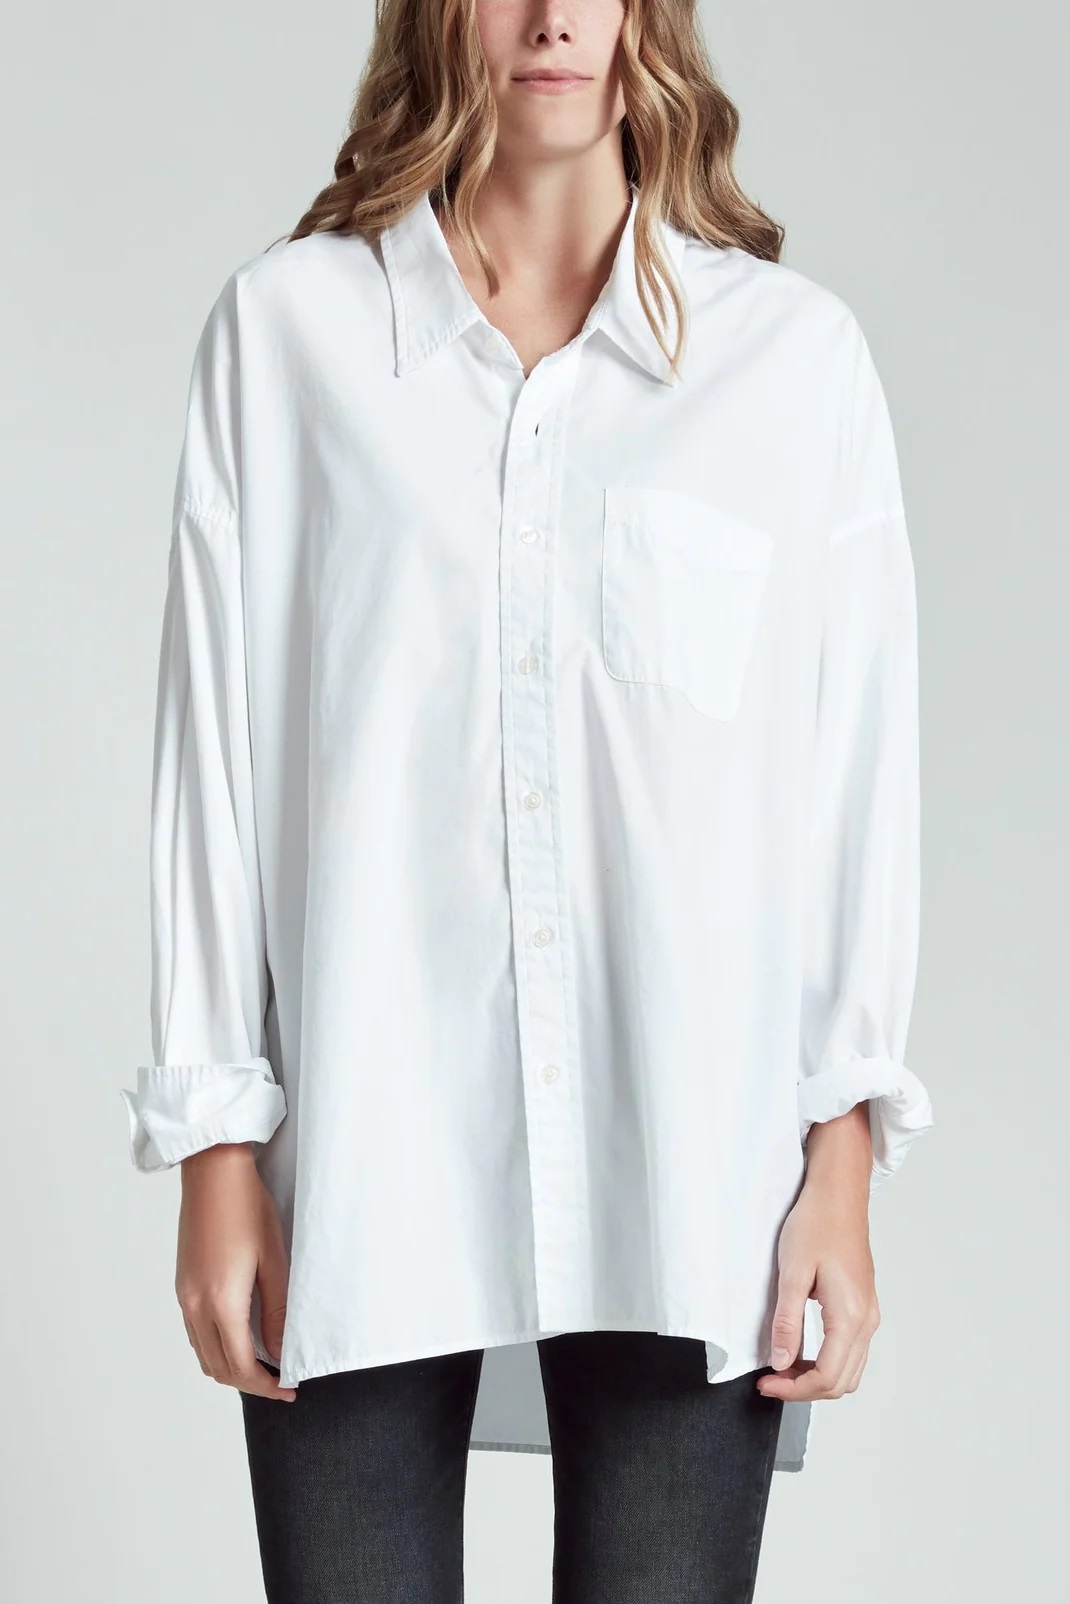 R13 Drop Neck Oxford Shirt in White S